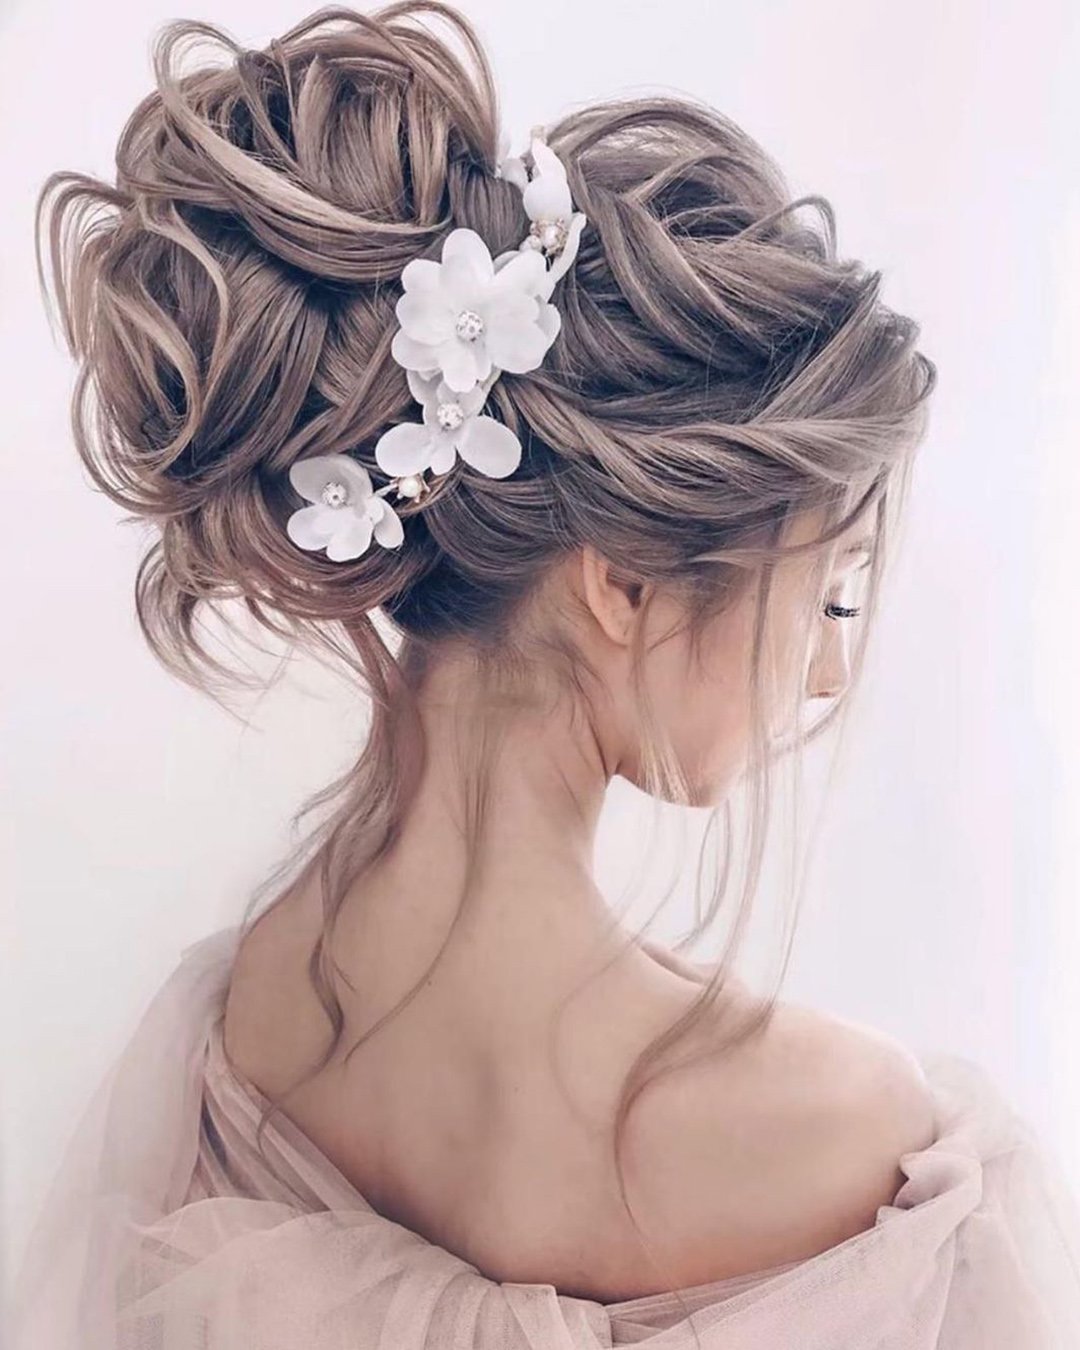 EASY UPDO WEDDING HAIRSTYLE FOR LONG HAIR  Alex Gaboury